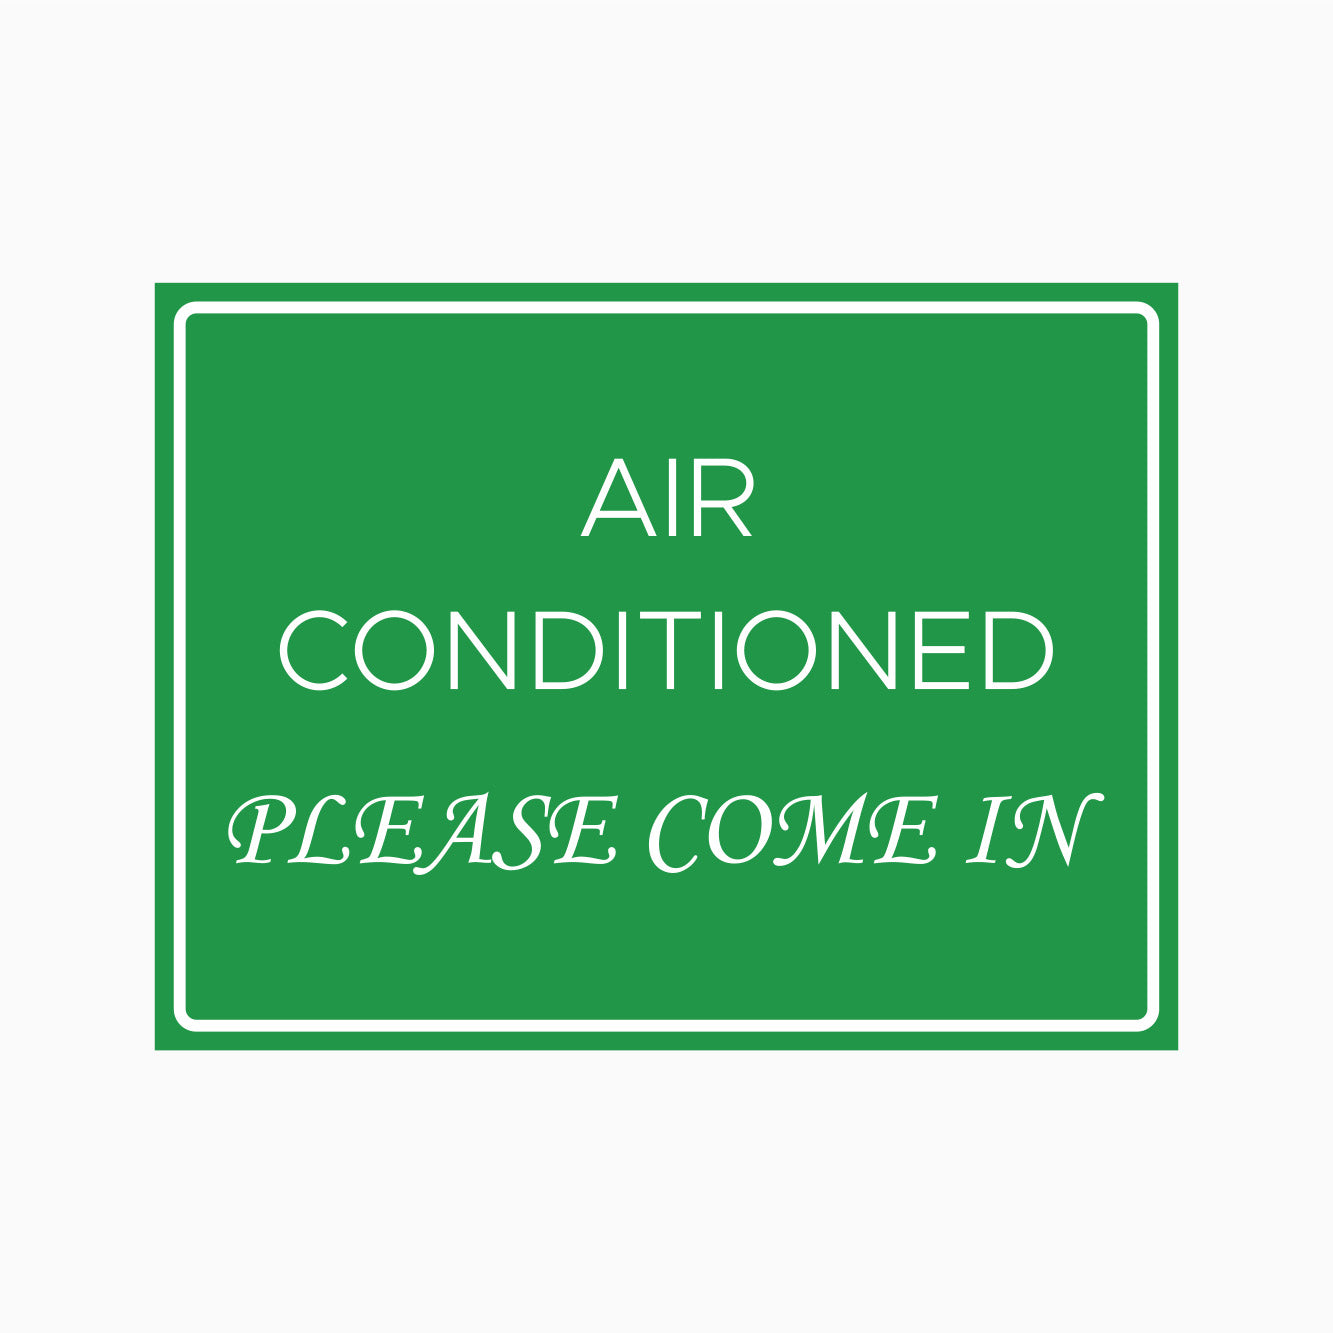 AIR CONDITIONED SIGN - PLEASE COME IN SIGN